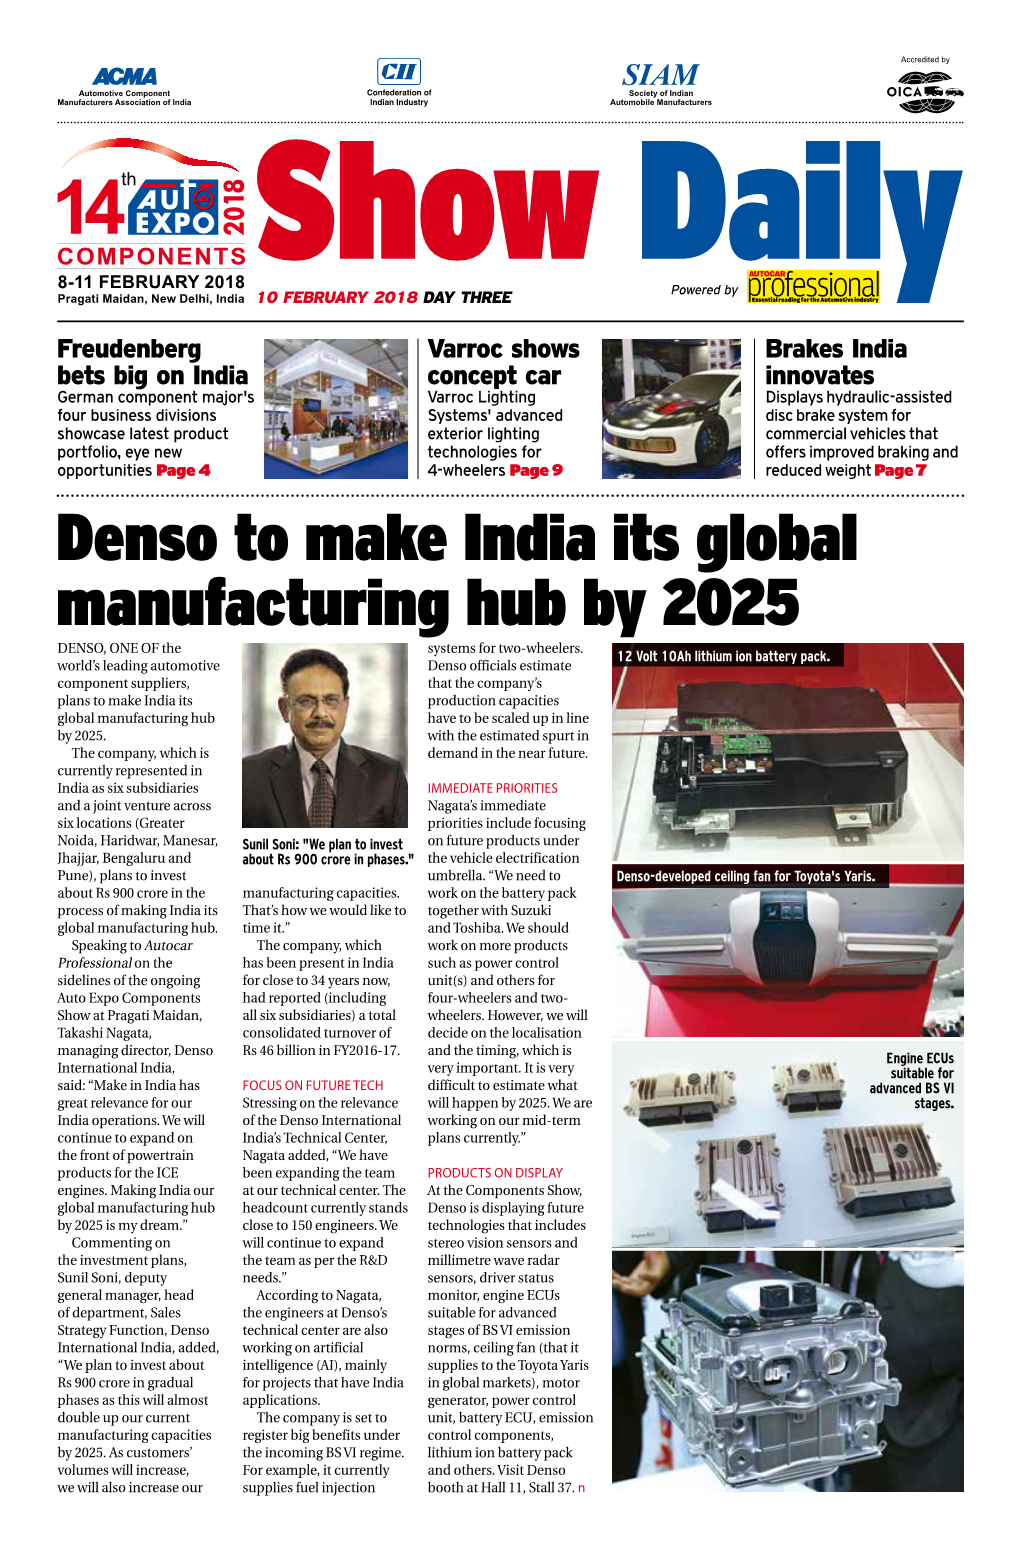 Denso to Make India Its Global Manufacturing Hub by 2025 DENSO, ONE of the Systems for Two-Wheelers